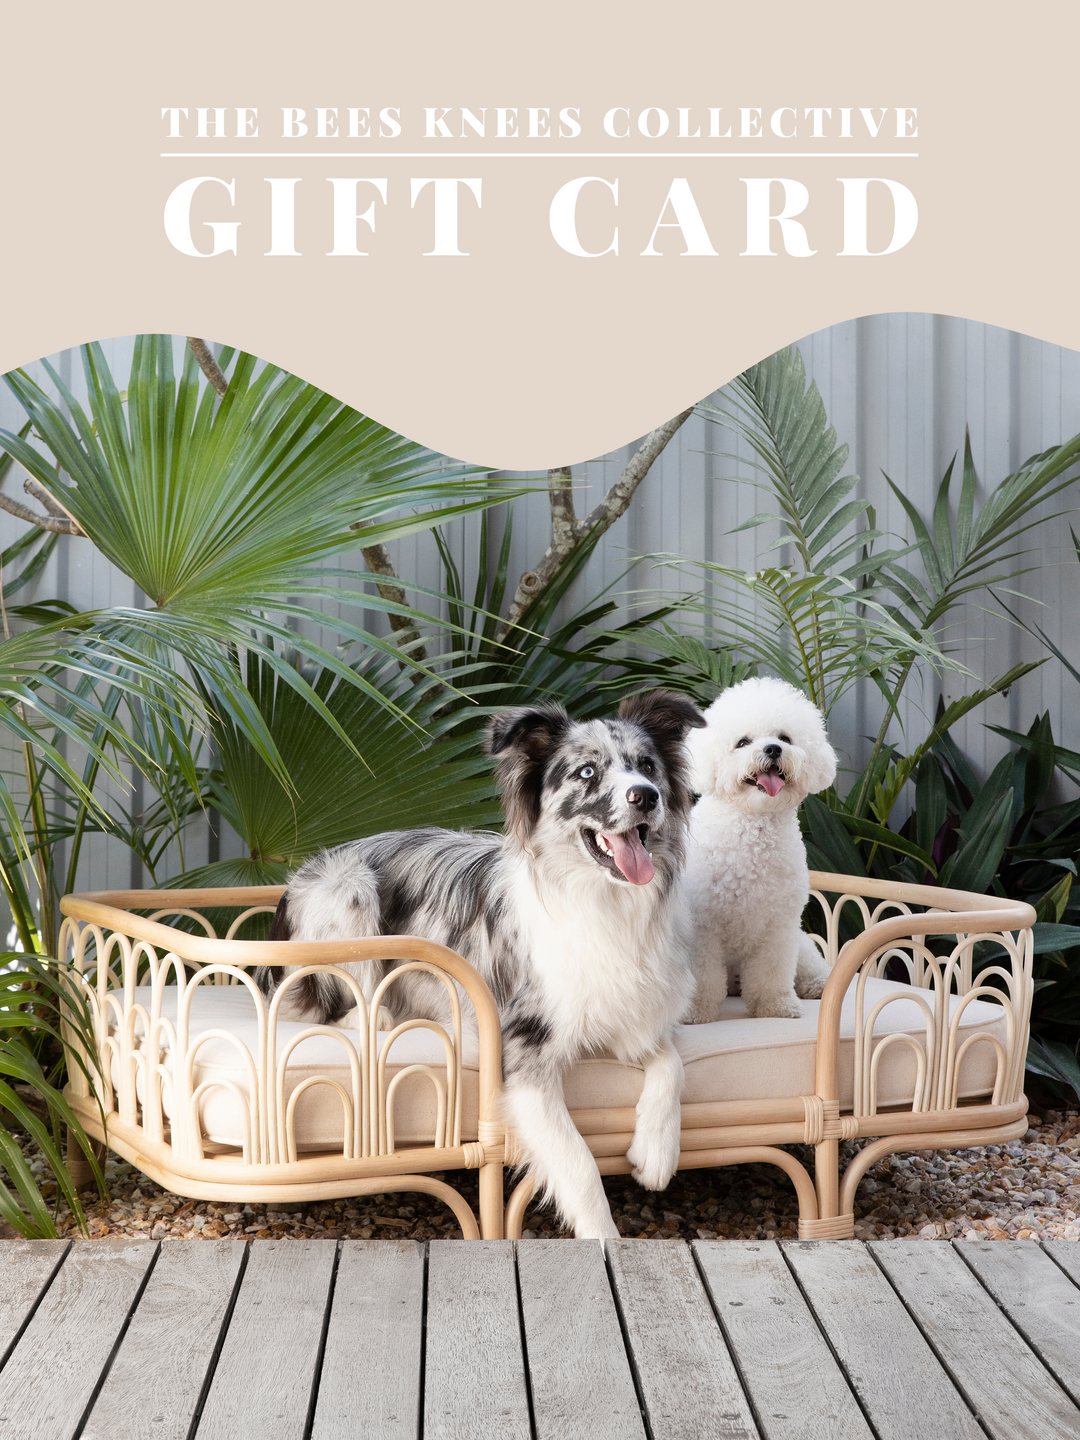 The Bees Knees Collective Gift Card